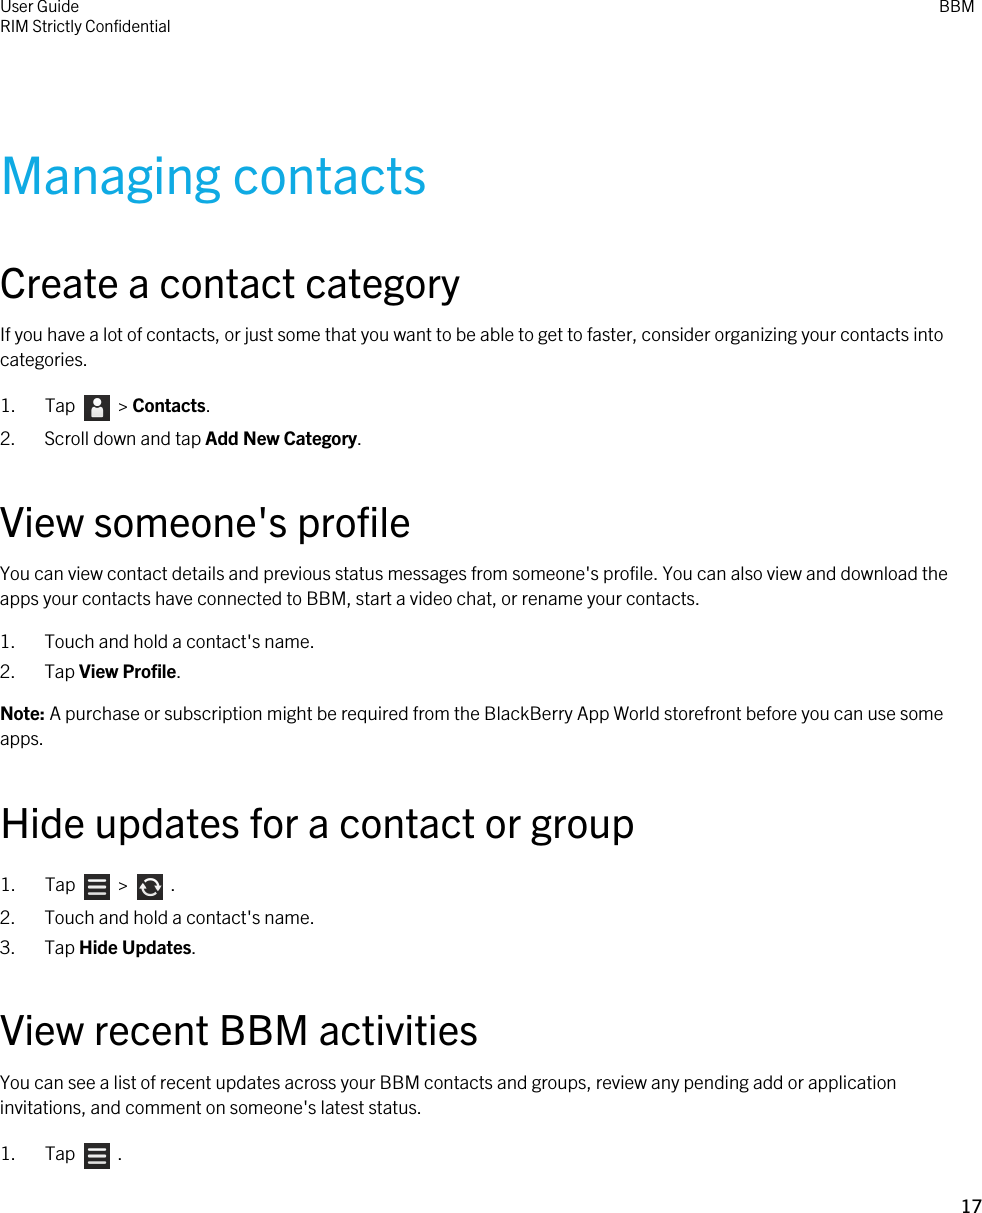 Managing contactsCreate a contact categoryIf you have a lot of contacts, or just some that you want to be able to get to faster, consider organizing your contacts into categories.1.  Tap    &gt; Contacts.2. Scroll down and tap Add New Category.View someone&apos;s profileYou can view contact details and previous status messages from someone&apos;s profile. You can also view and download the apps your contacts have connected to BBM, start a video chat, or rename your contacts.1. Touch and hold a contact&apos;s name.2. Tap View Profile.Note: A purchase or subscription might be required from the BlackBerry App World storefront before you can use some apps.Hide updates for a contact or group1.  Tap    &gt;    .2. Touch and hold a contact&apos;s name.3. Tap Hide Updates.View recent BBM activitiesYou can see a list of recent updates across your BBM contacts and groups, review any pending add or application invitations, and comment on someone&apos;s latest status.1.  Tap    .User GuideRIM Strictly ConfidentialBBM17 